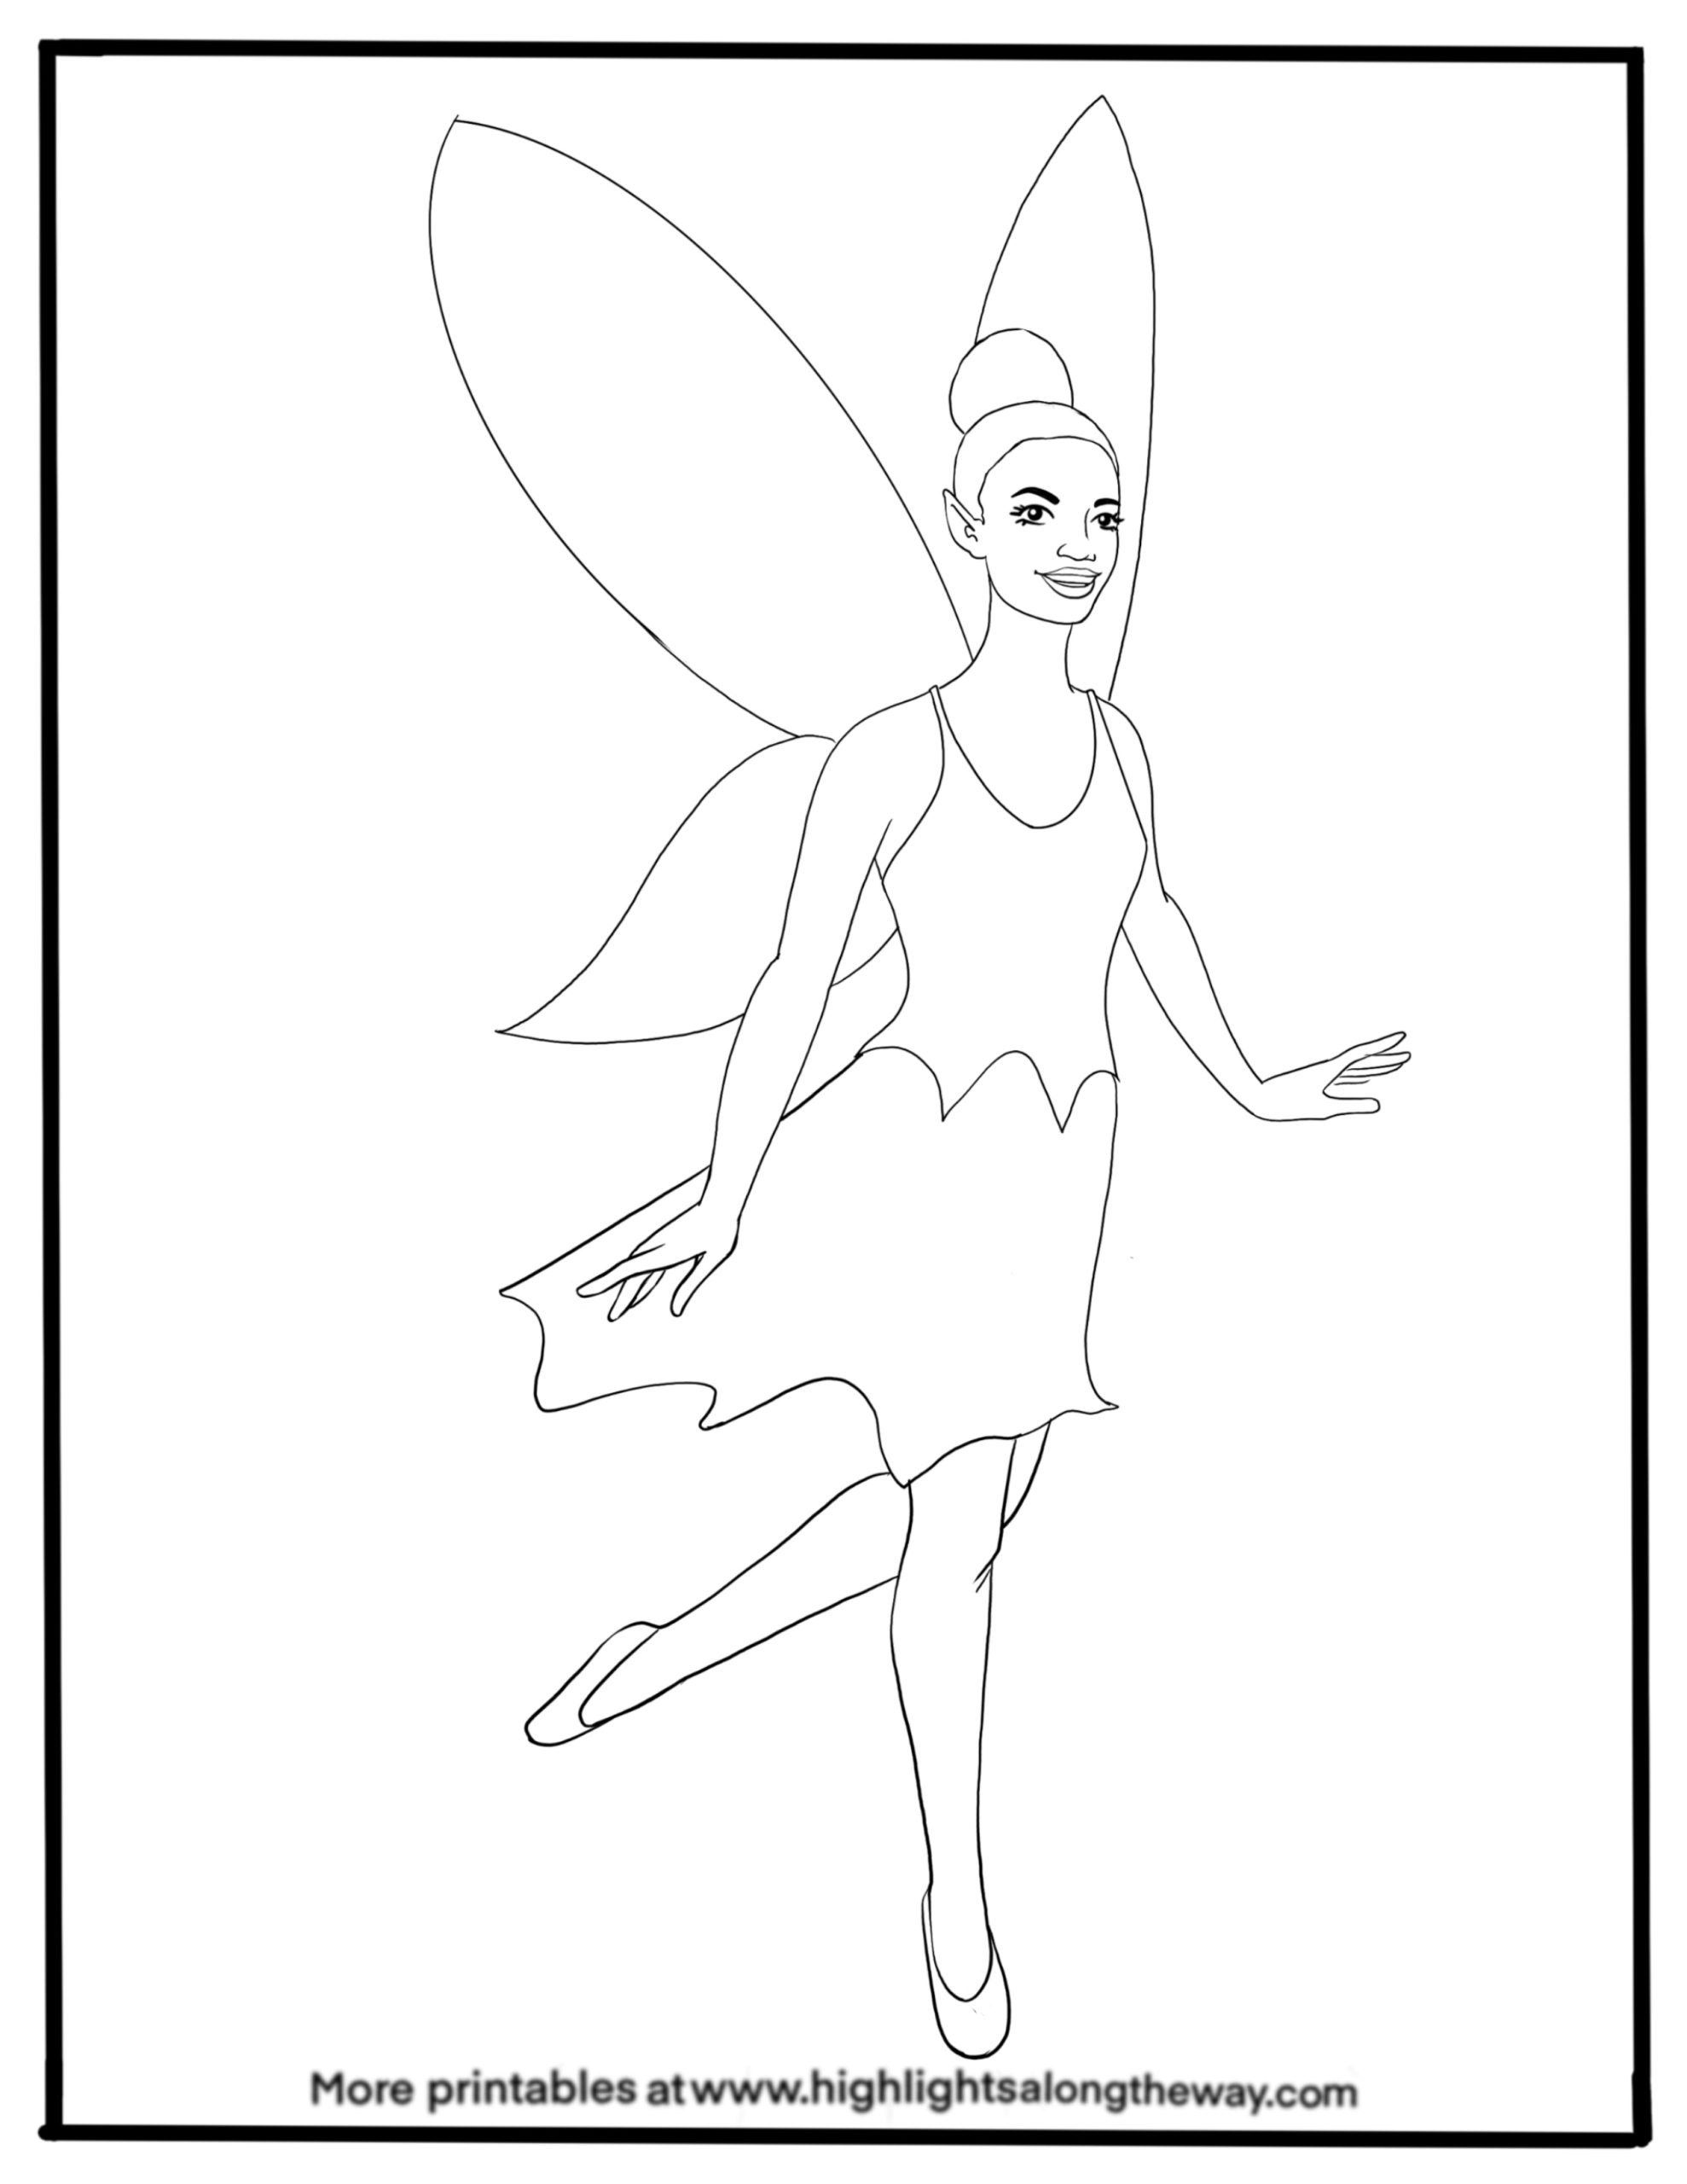 Peter pan and wendy coloring pages